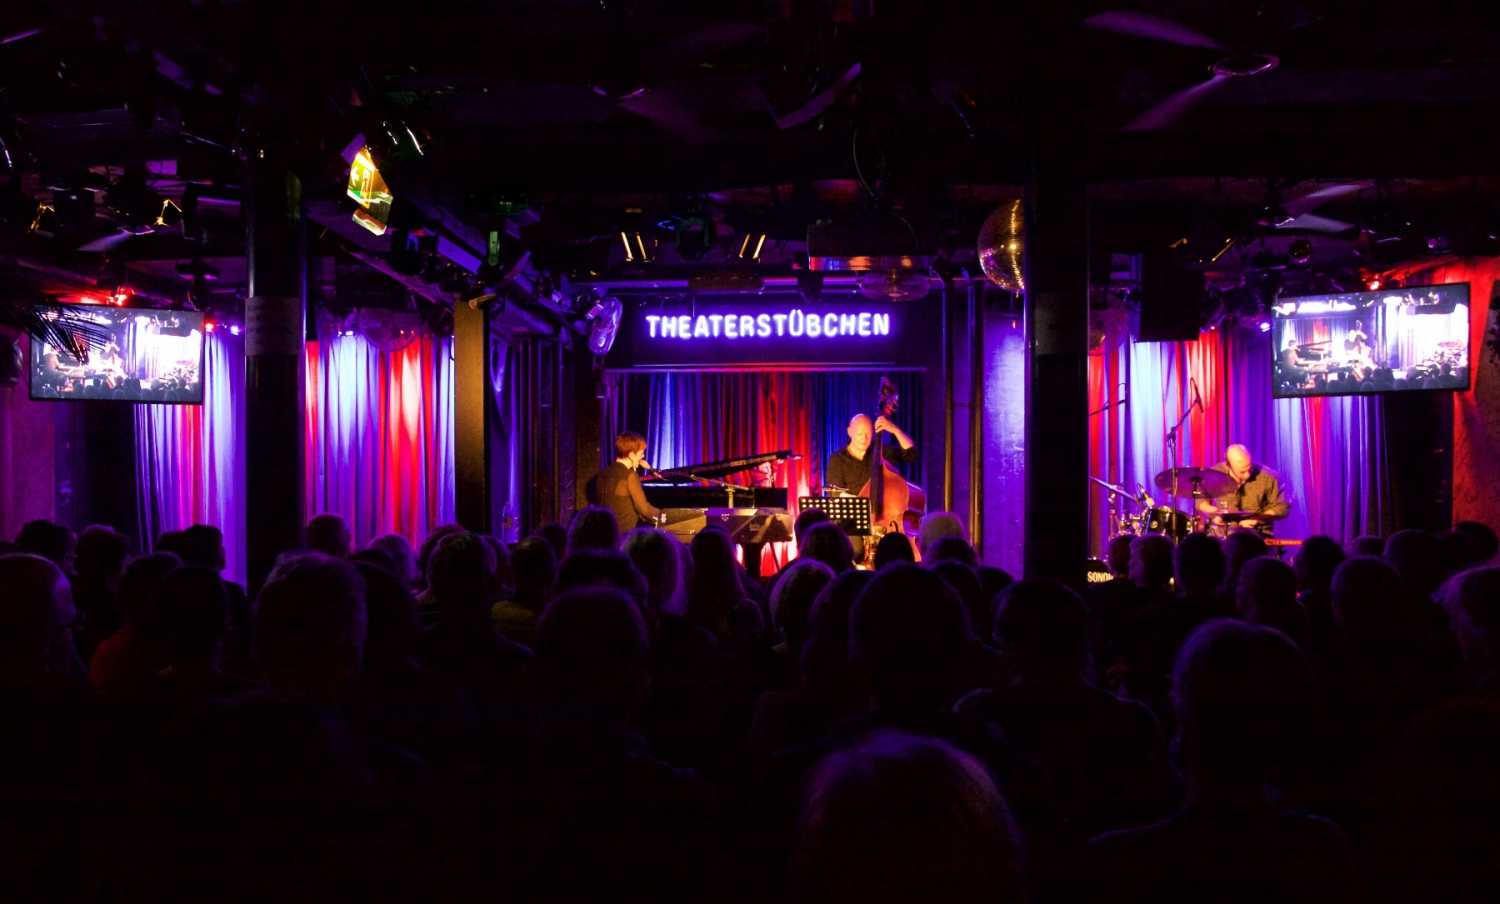 The Theaterstübchen Kassel has developed into one of the country's finest jazz music venues